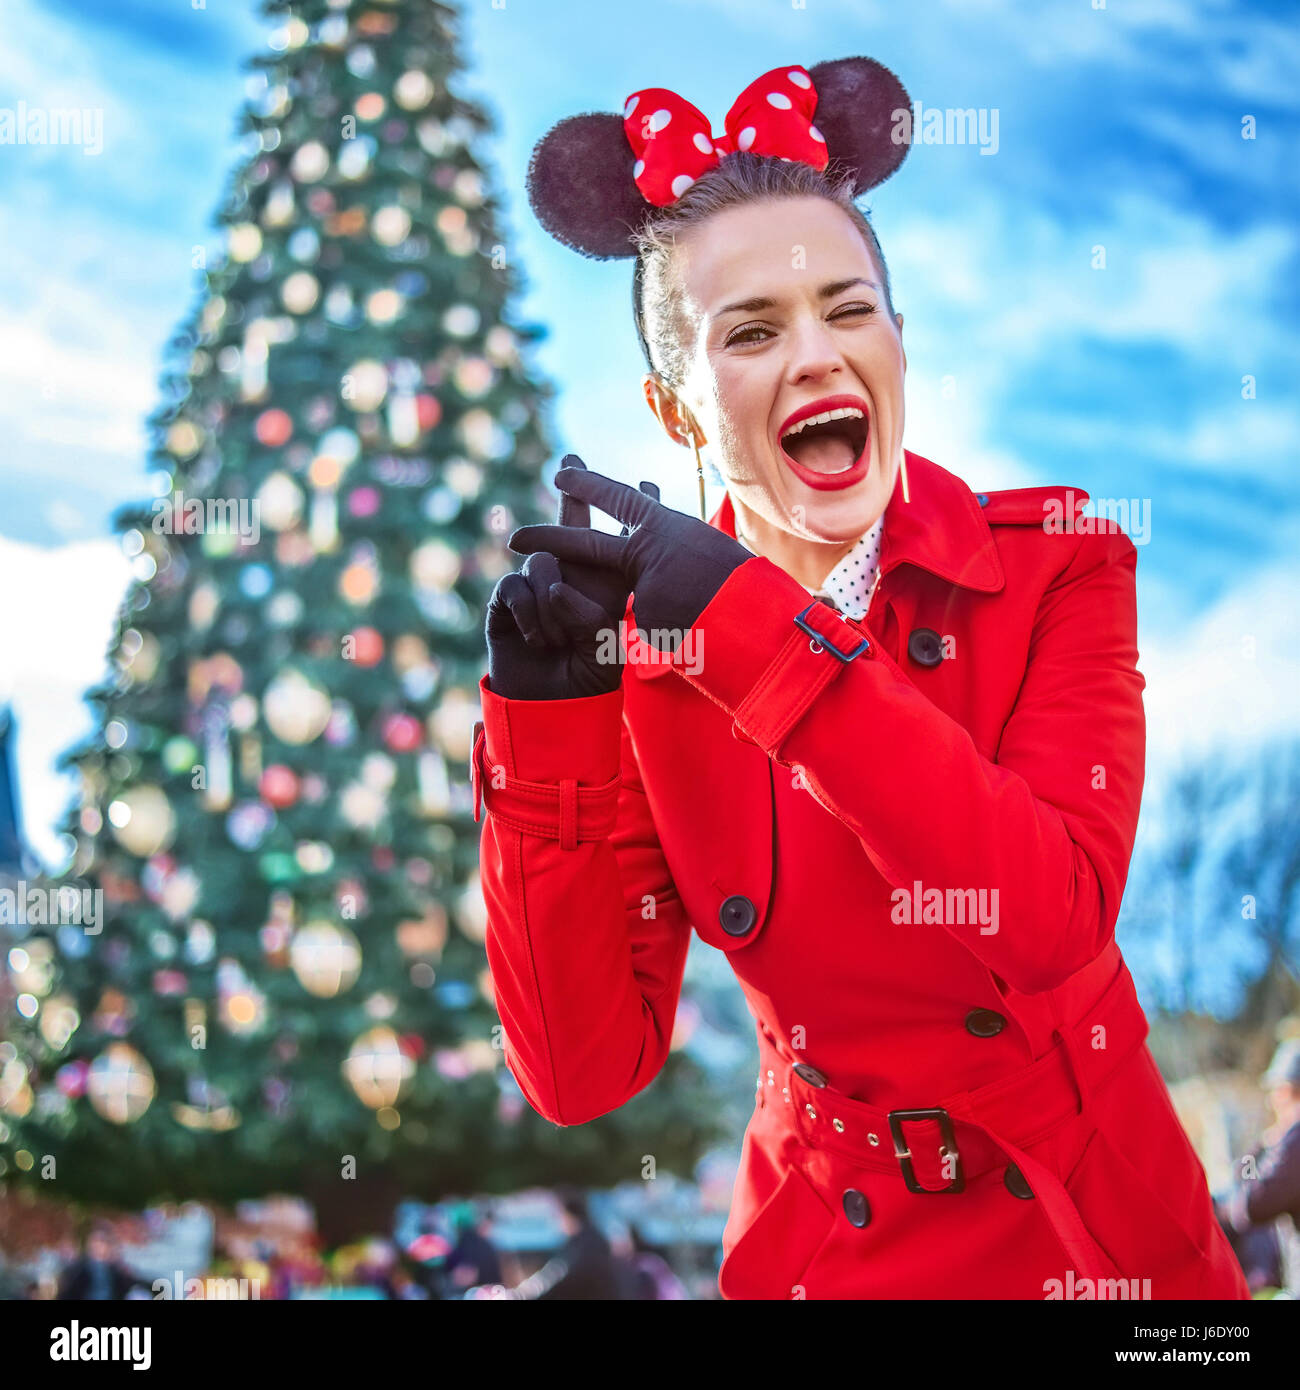 DISNEYLAND, FRANCE - DECEMBER, 8, 2016: smiling young woman in red trench coat in the front of big Christmas tree showing hashtag gesture Stock Photo